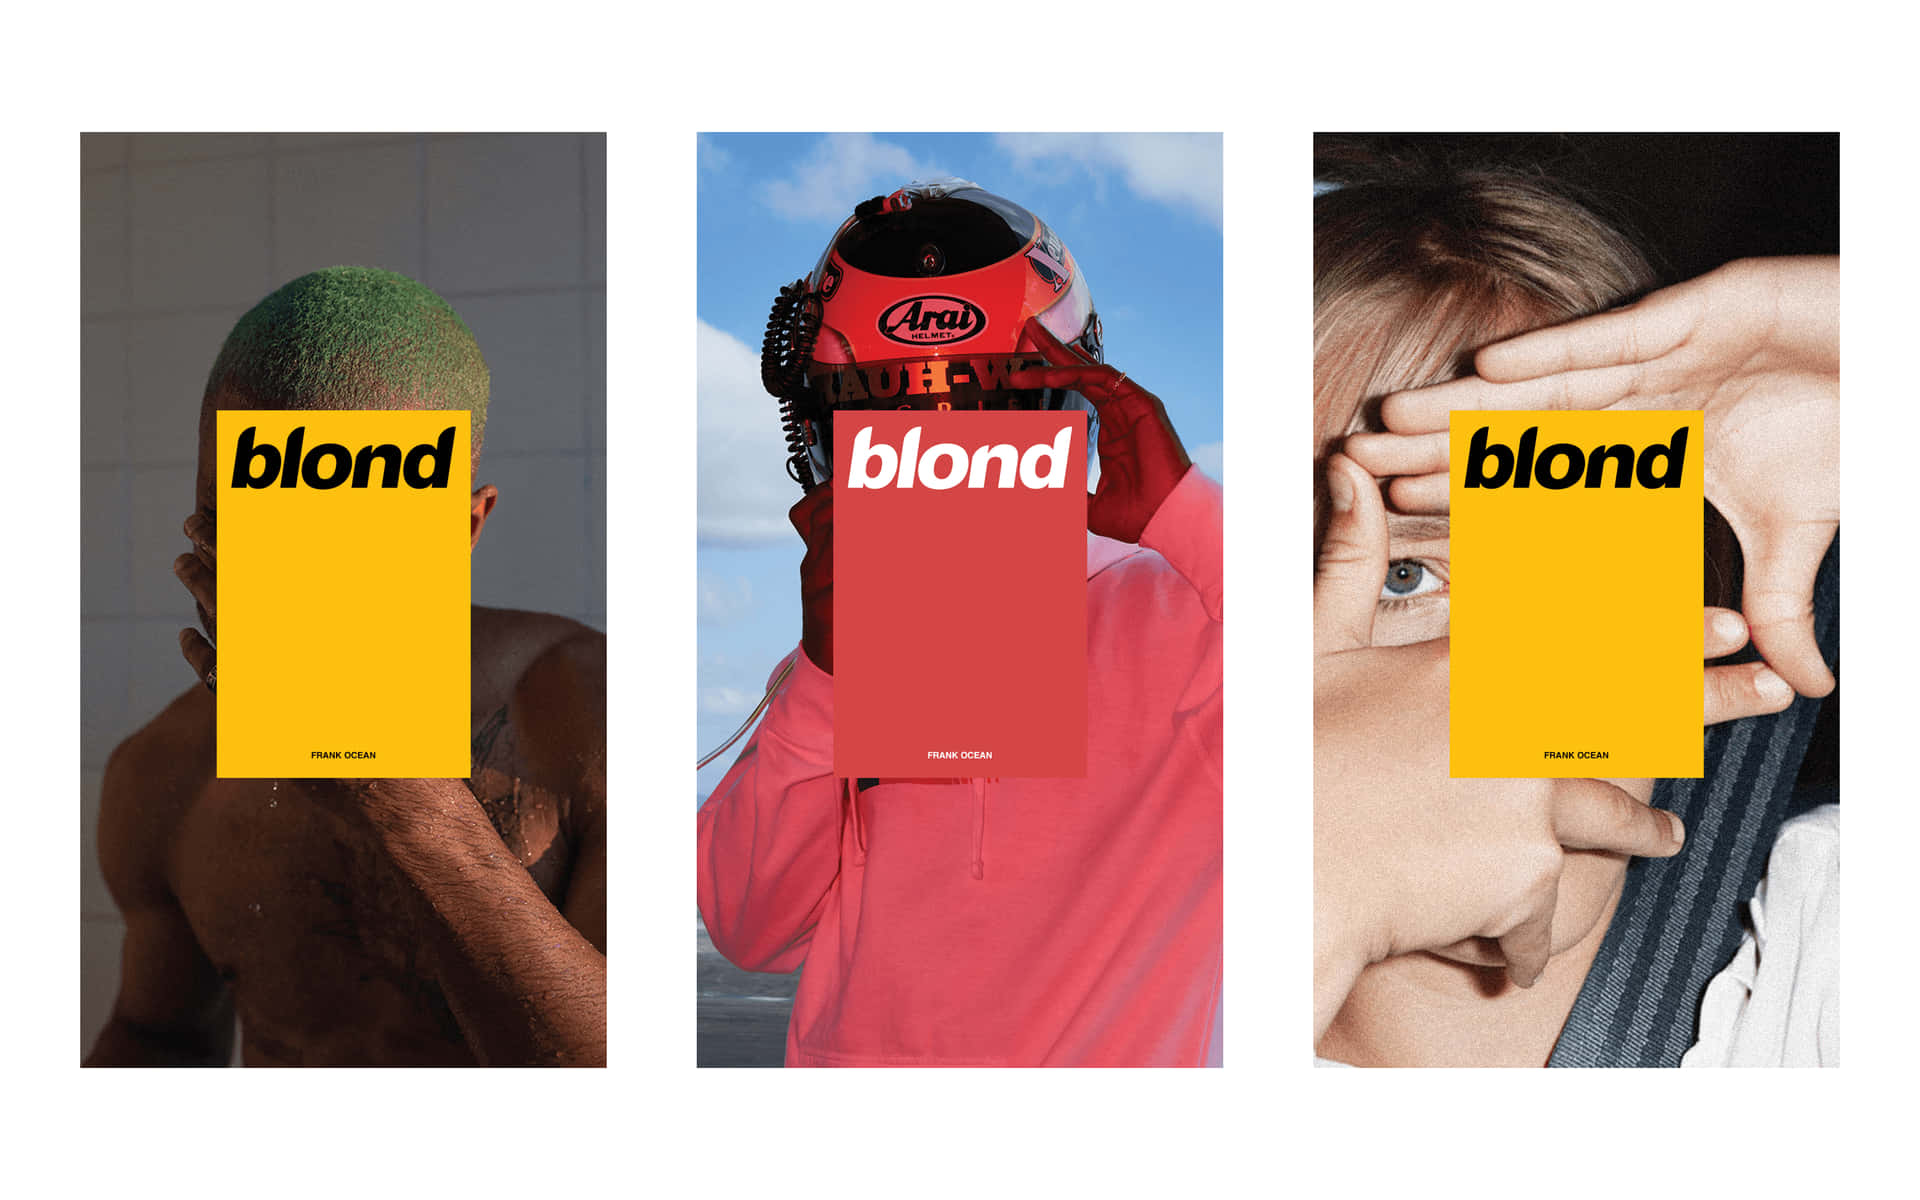 Blond - Ad Campaign By Adam Savage Wallpaper